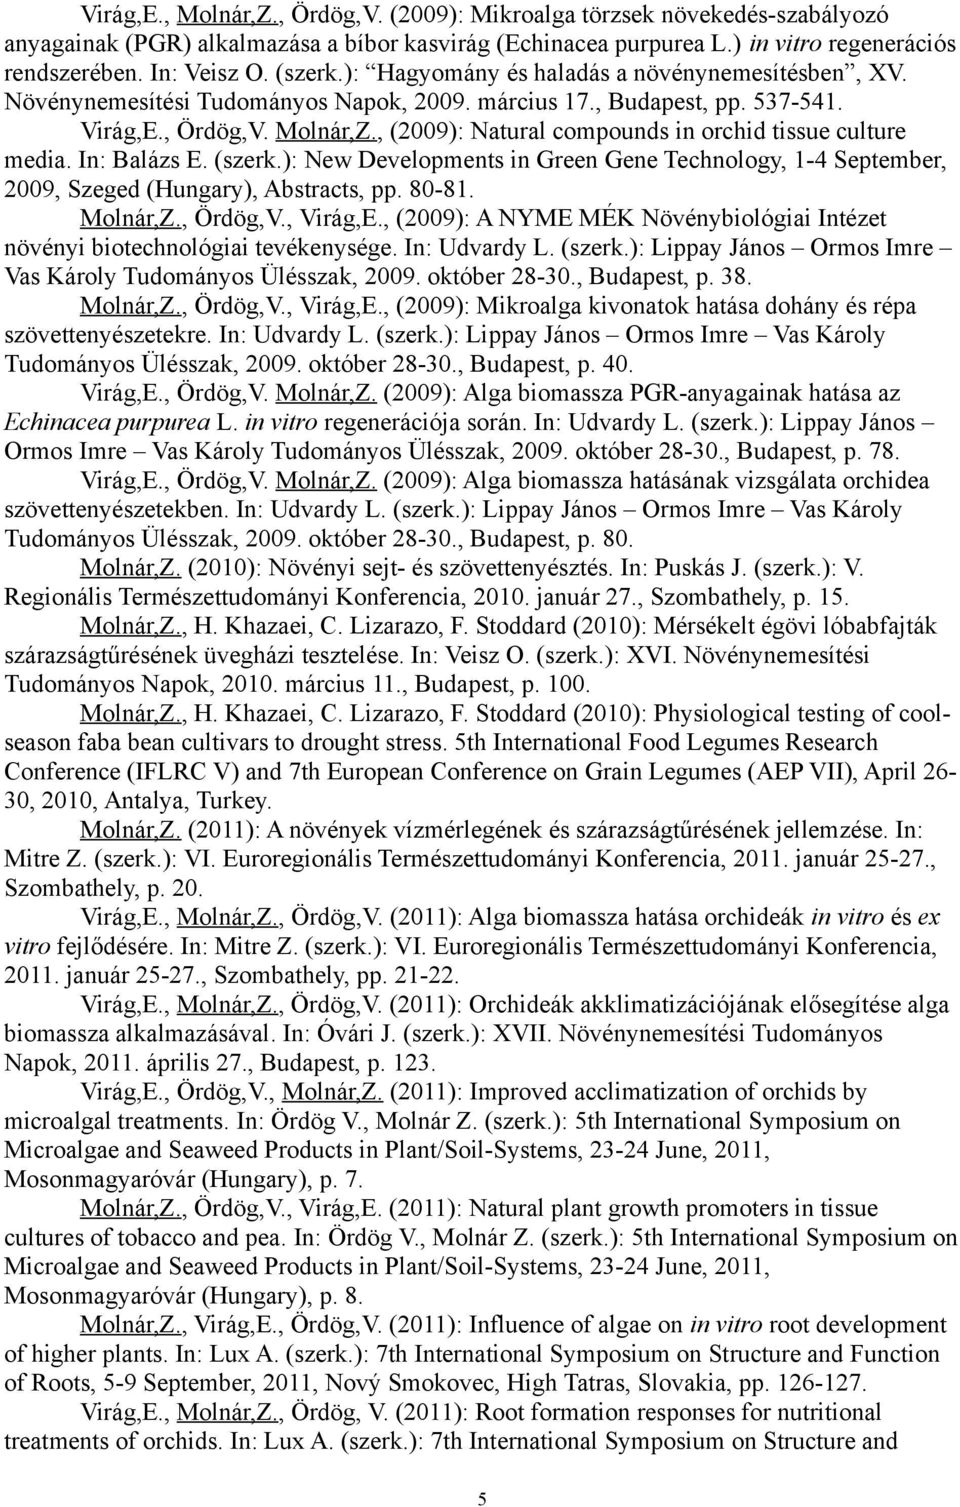 , (2009): Natural compounds in orchid tissue culture media. In: Balázs E. (szerk.): New Developments in Green Gene Technology, 1-4 September, 2009, Szeged (Hungary), Abstracts, pp. 80-81. Molnár,Z.